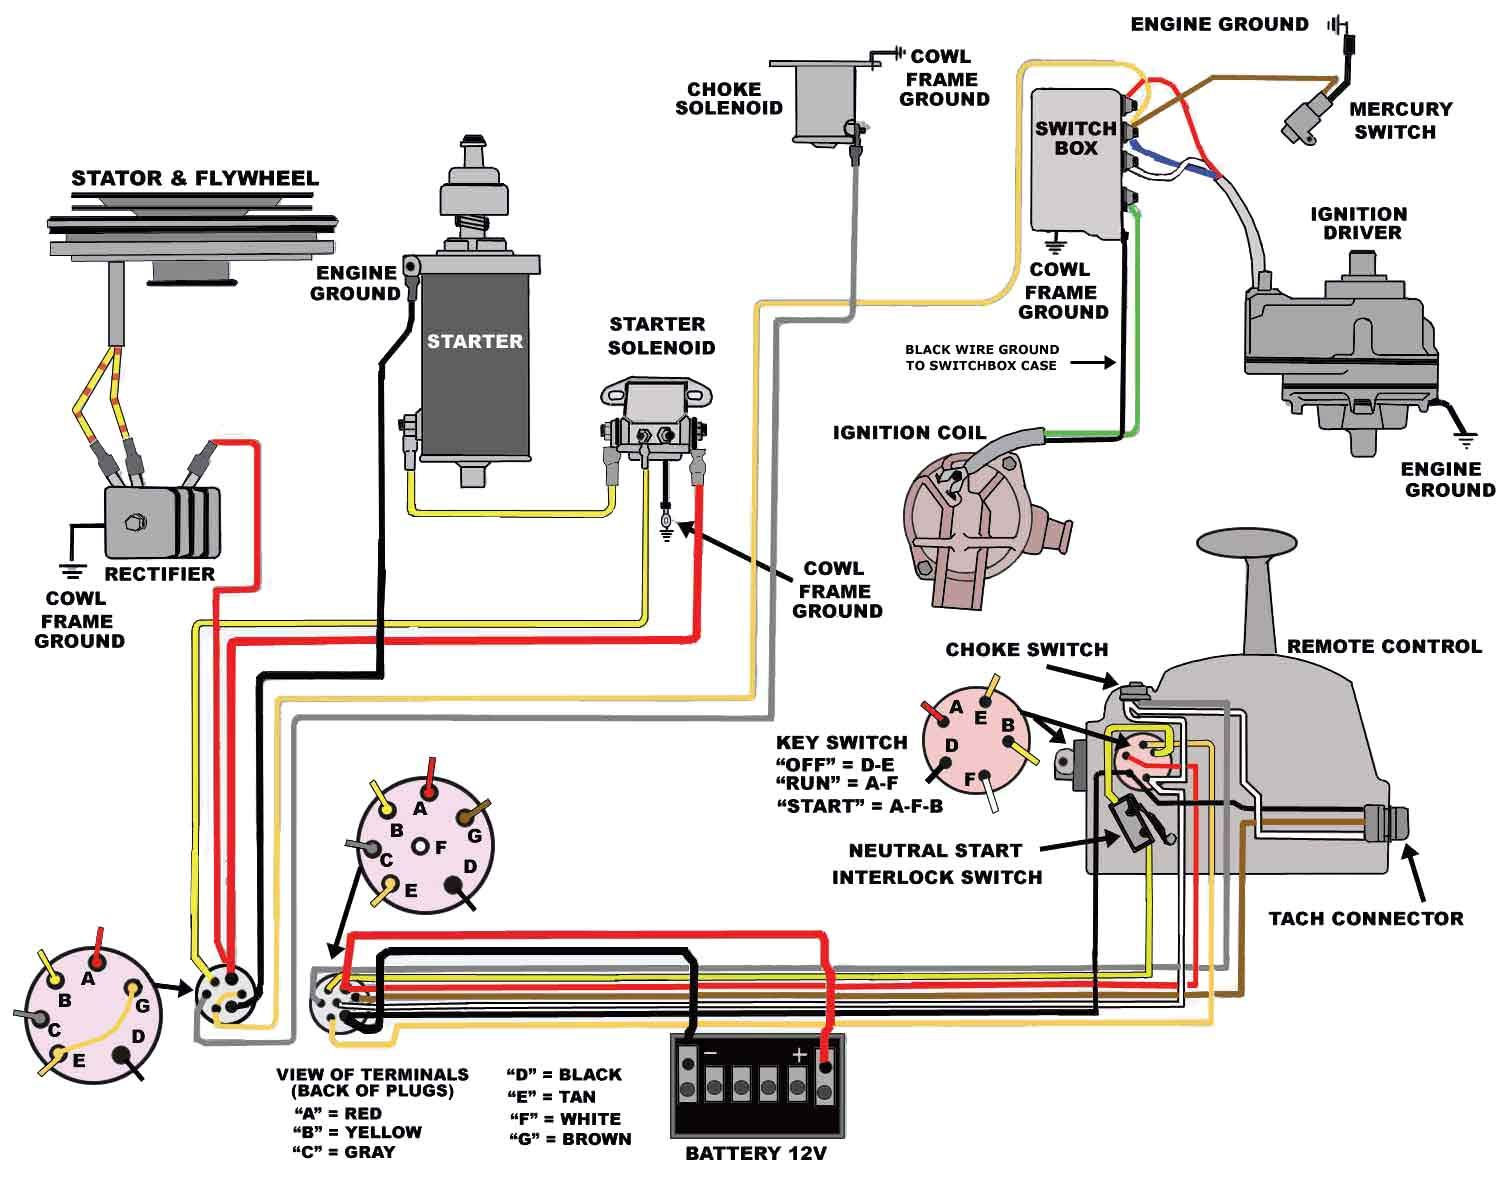 Outboard Ignition Switch Wiring Diagram - Today Wiring Diagram - Mercury Outboard Ignition Switch Wiring Diagram